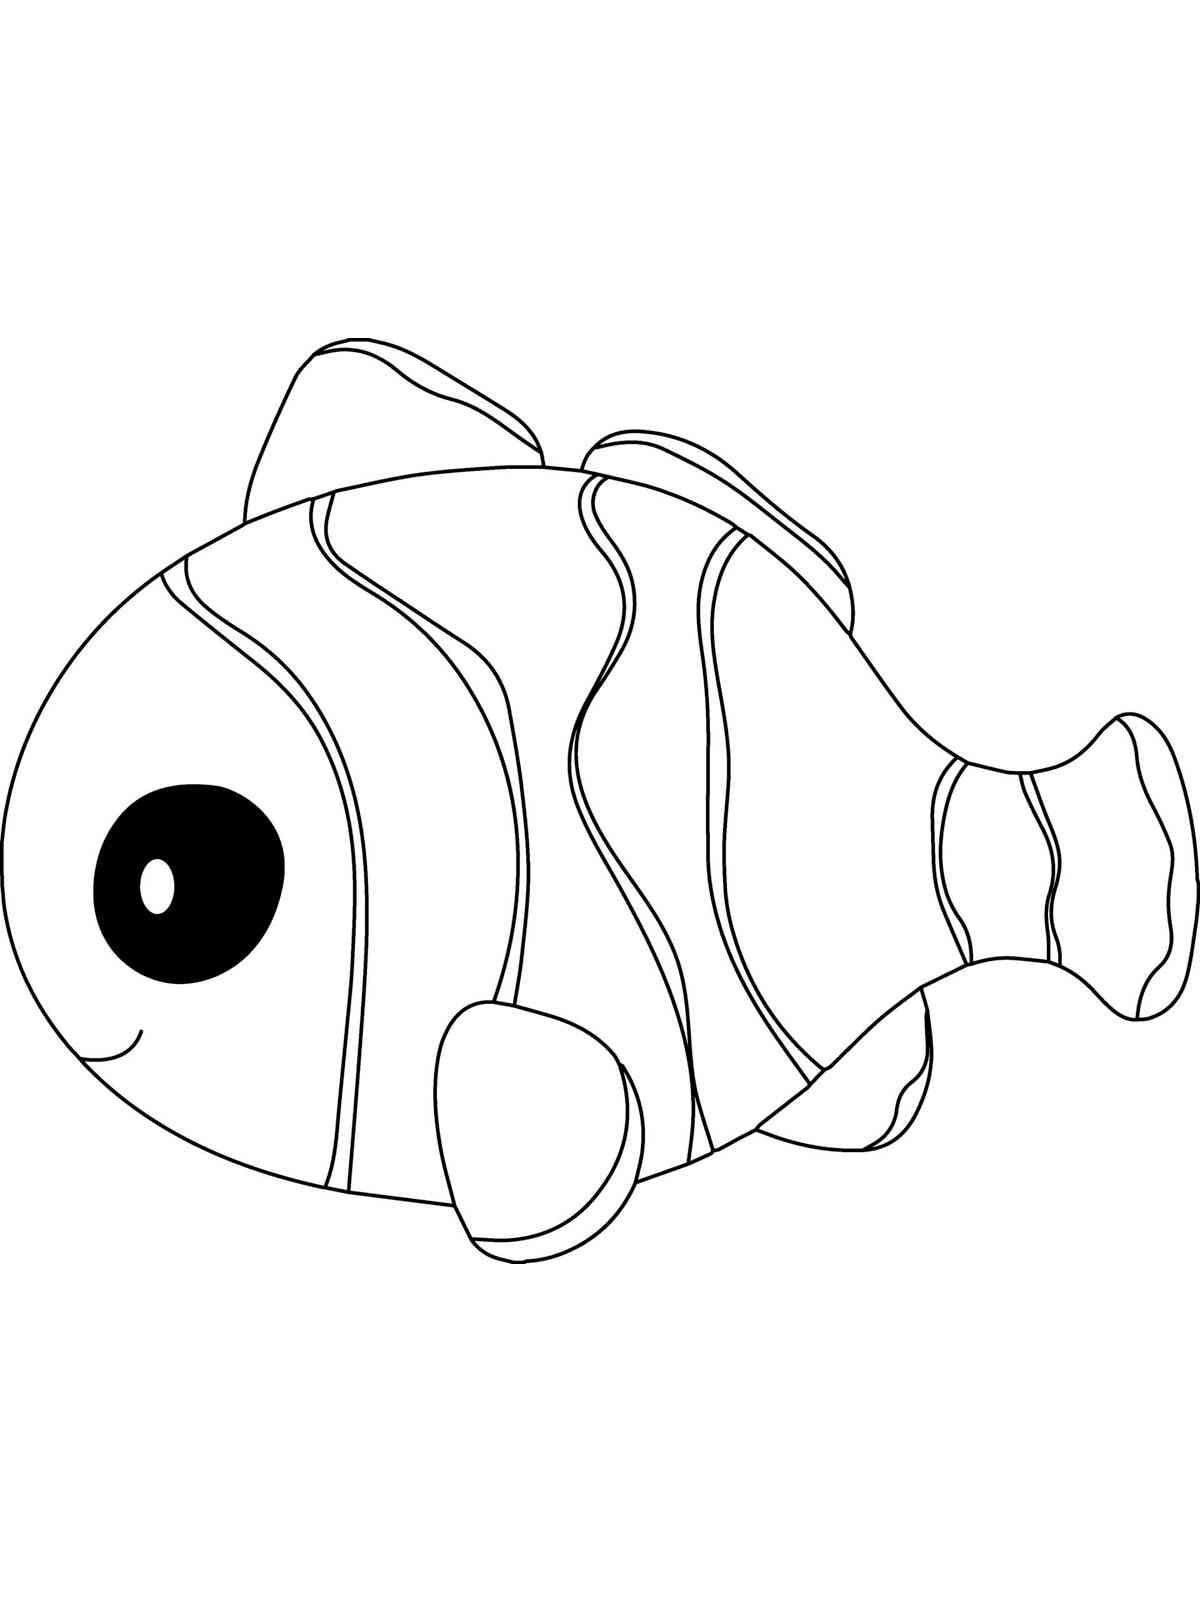 Beauty Clownfish coloring page